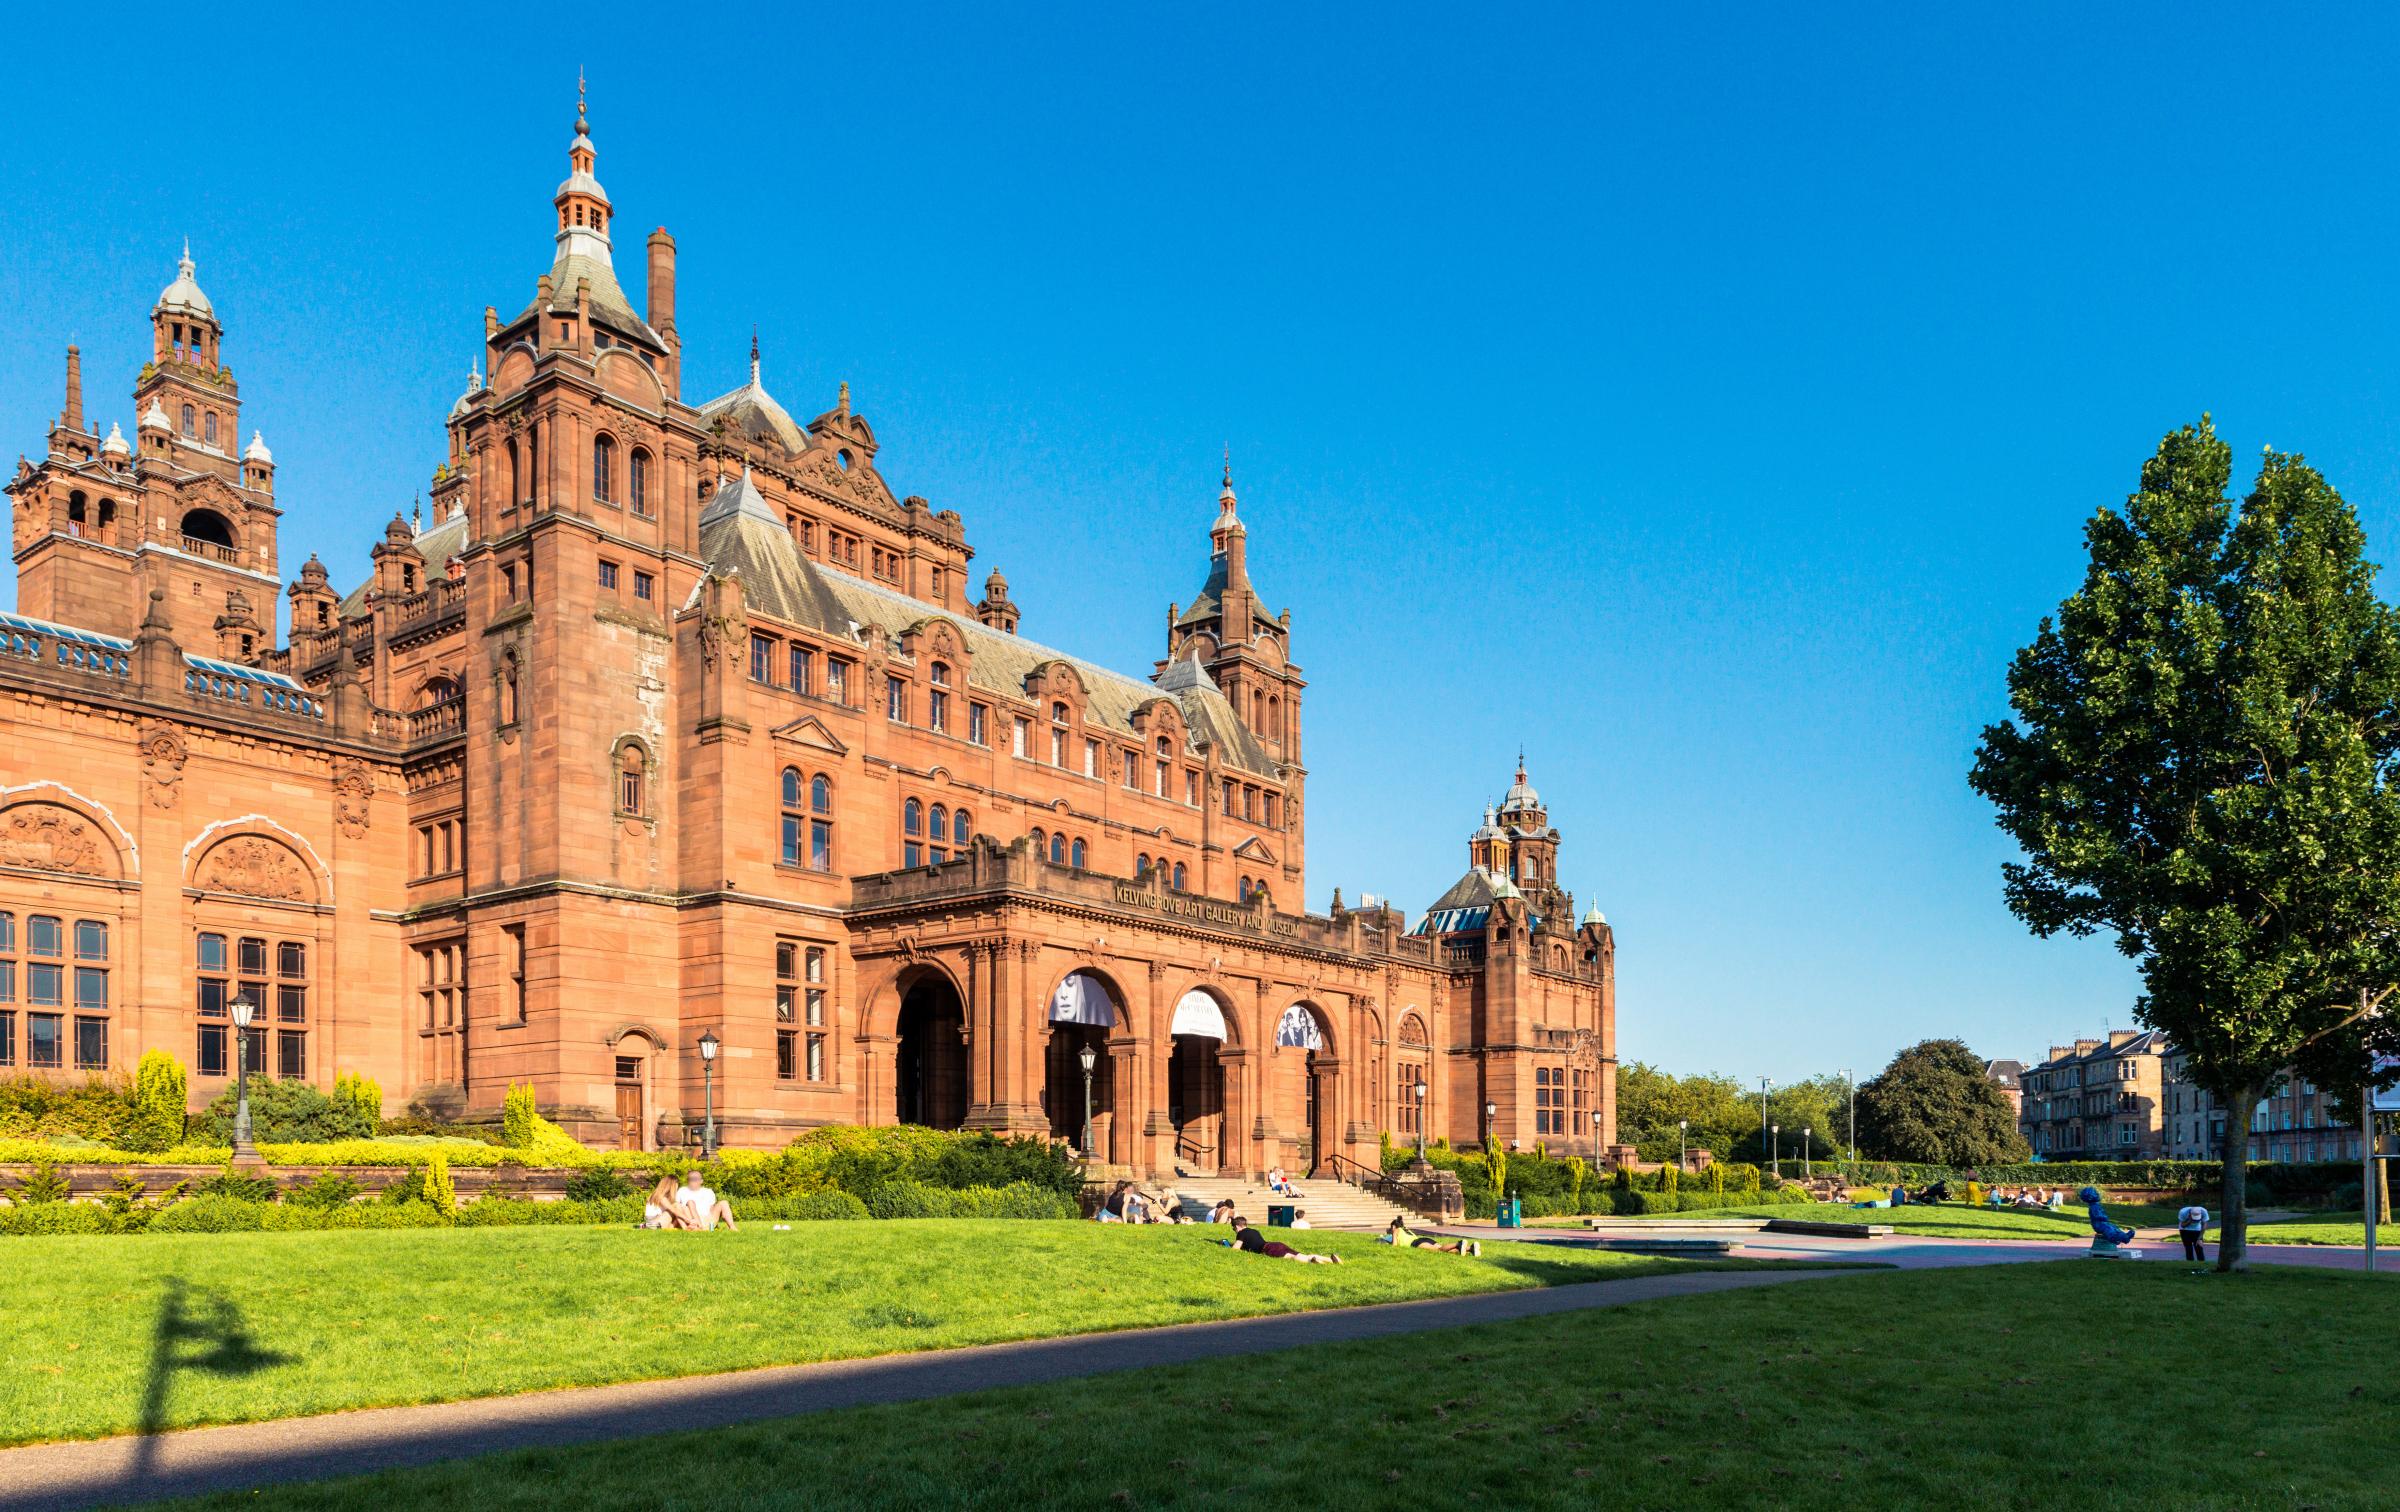 Parking fees are already in place at Kelvingrove Art Gallery and Museum